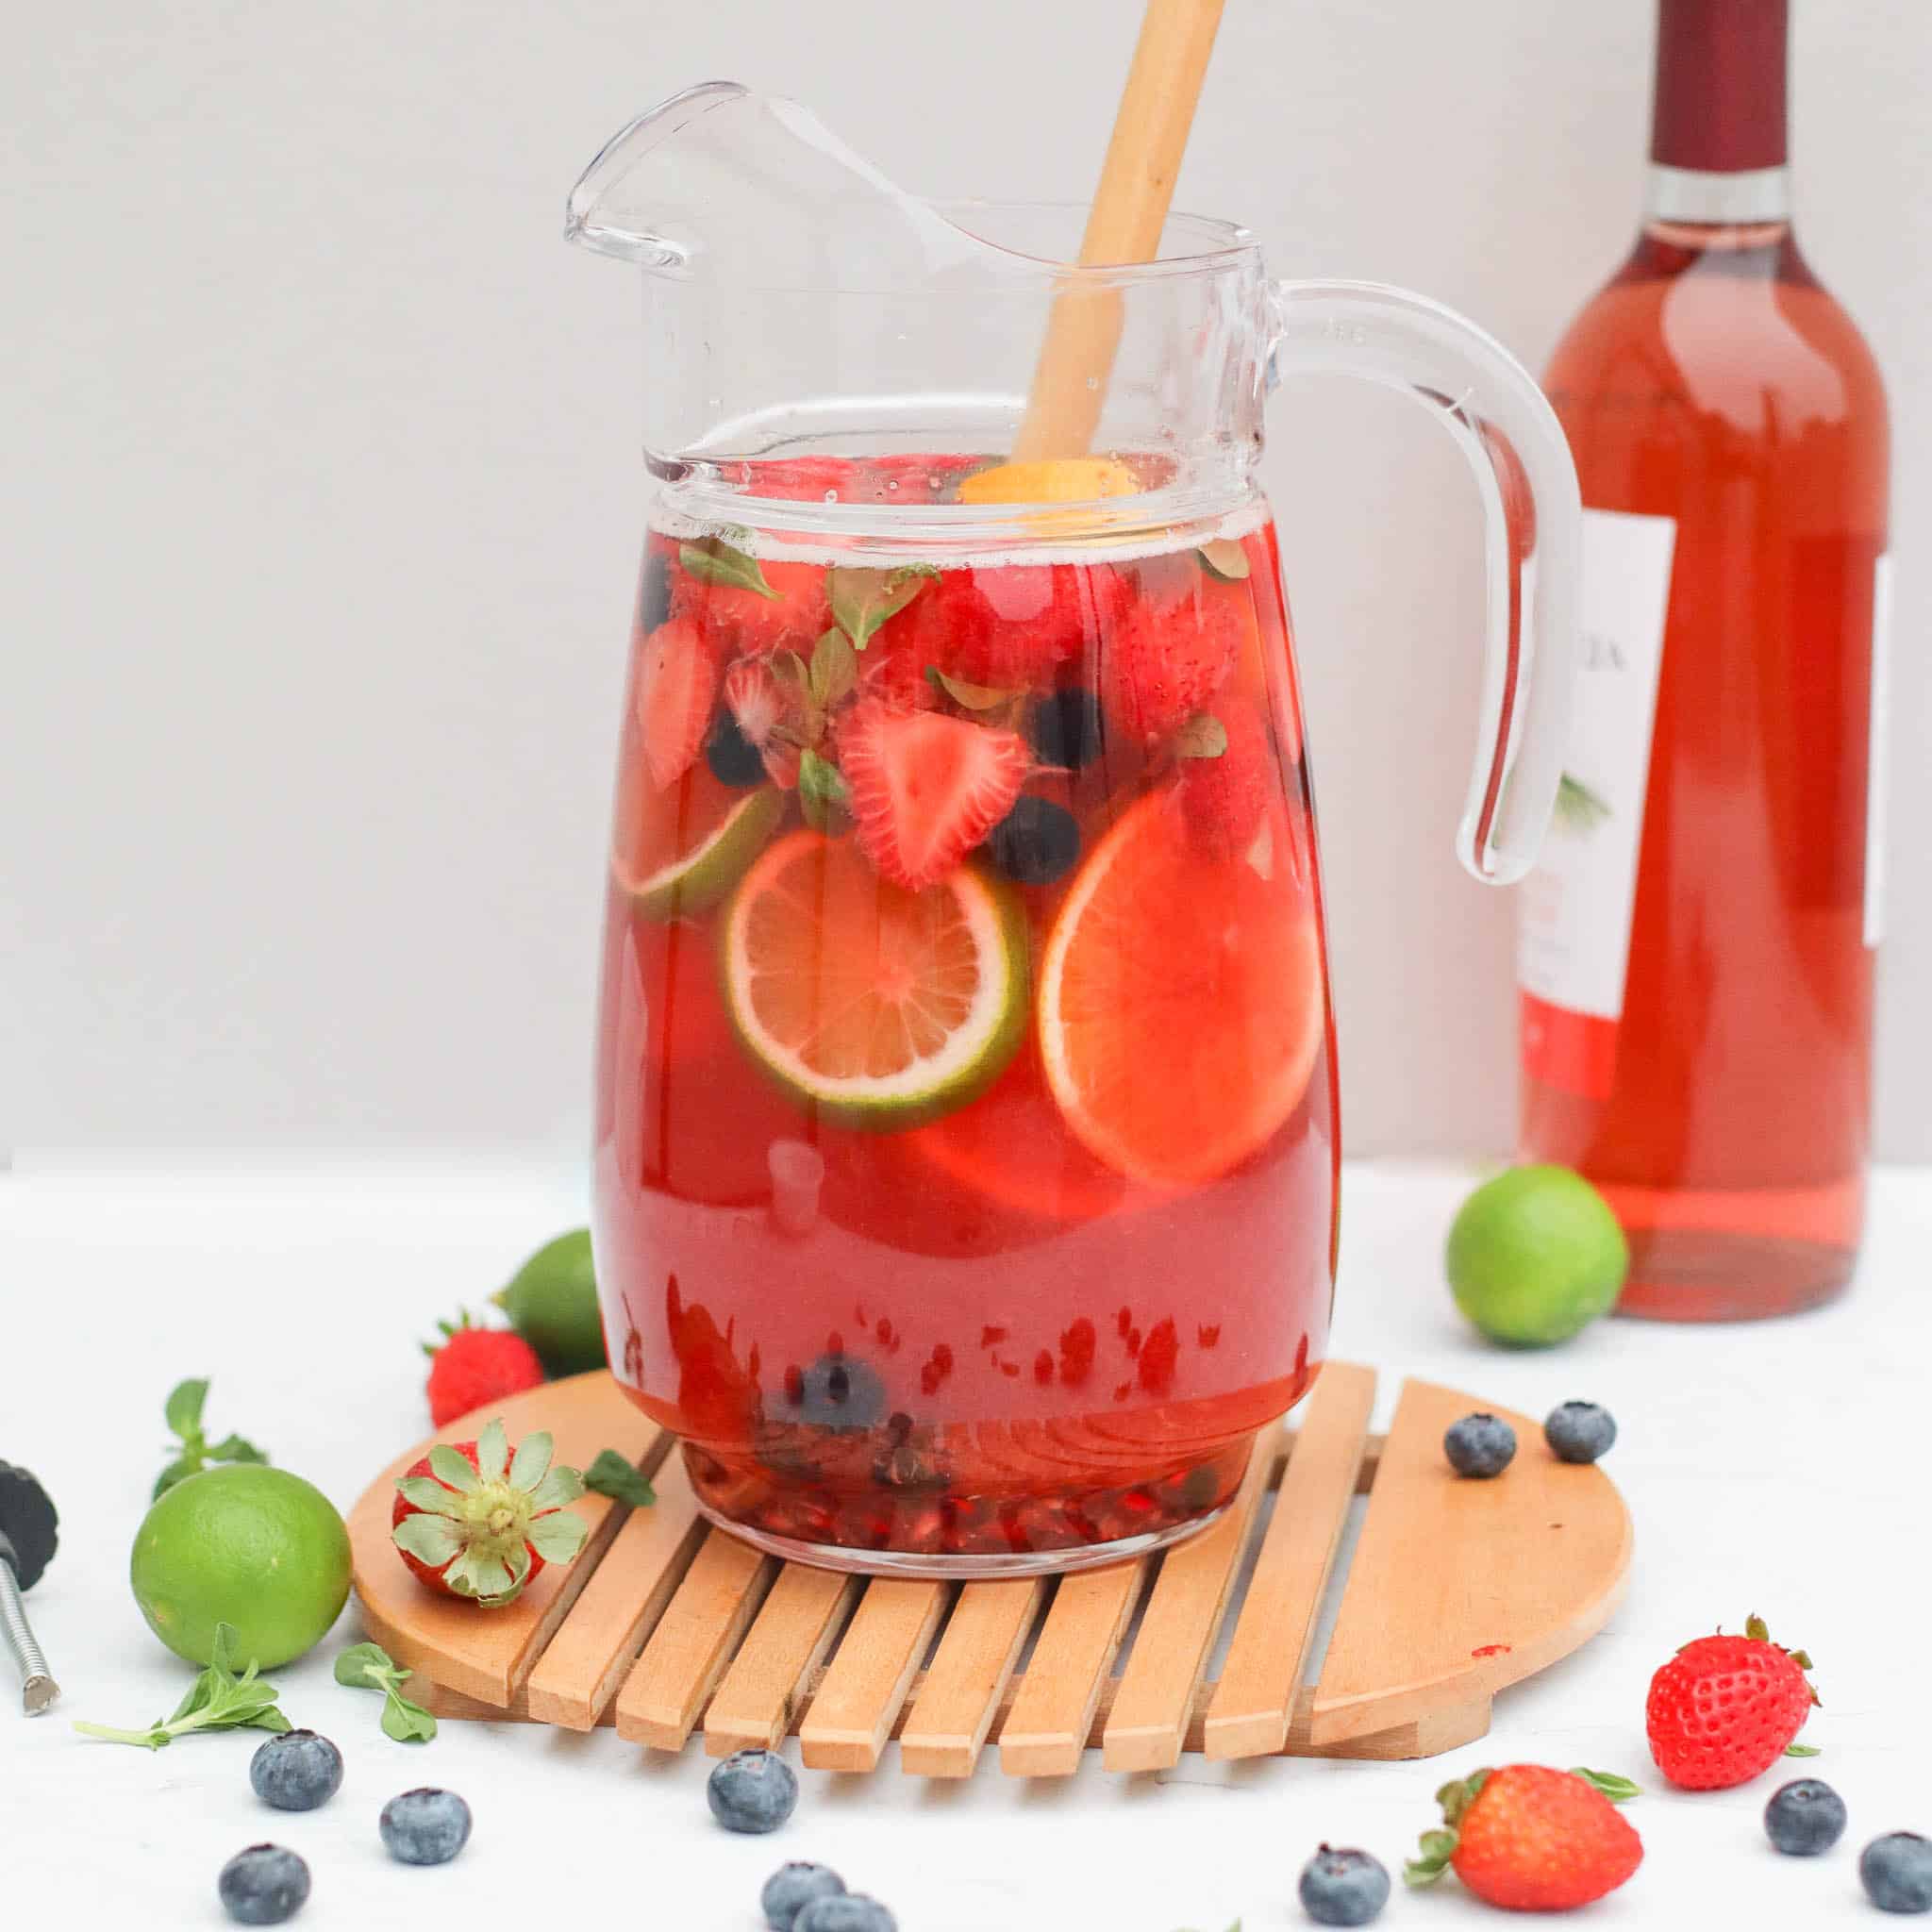 Best Sangria Drink Recipe - How to Make Sangria Pitcher